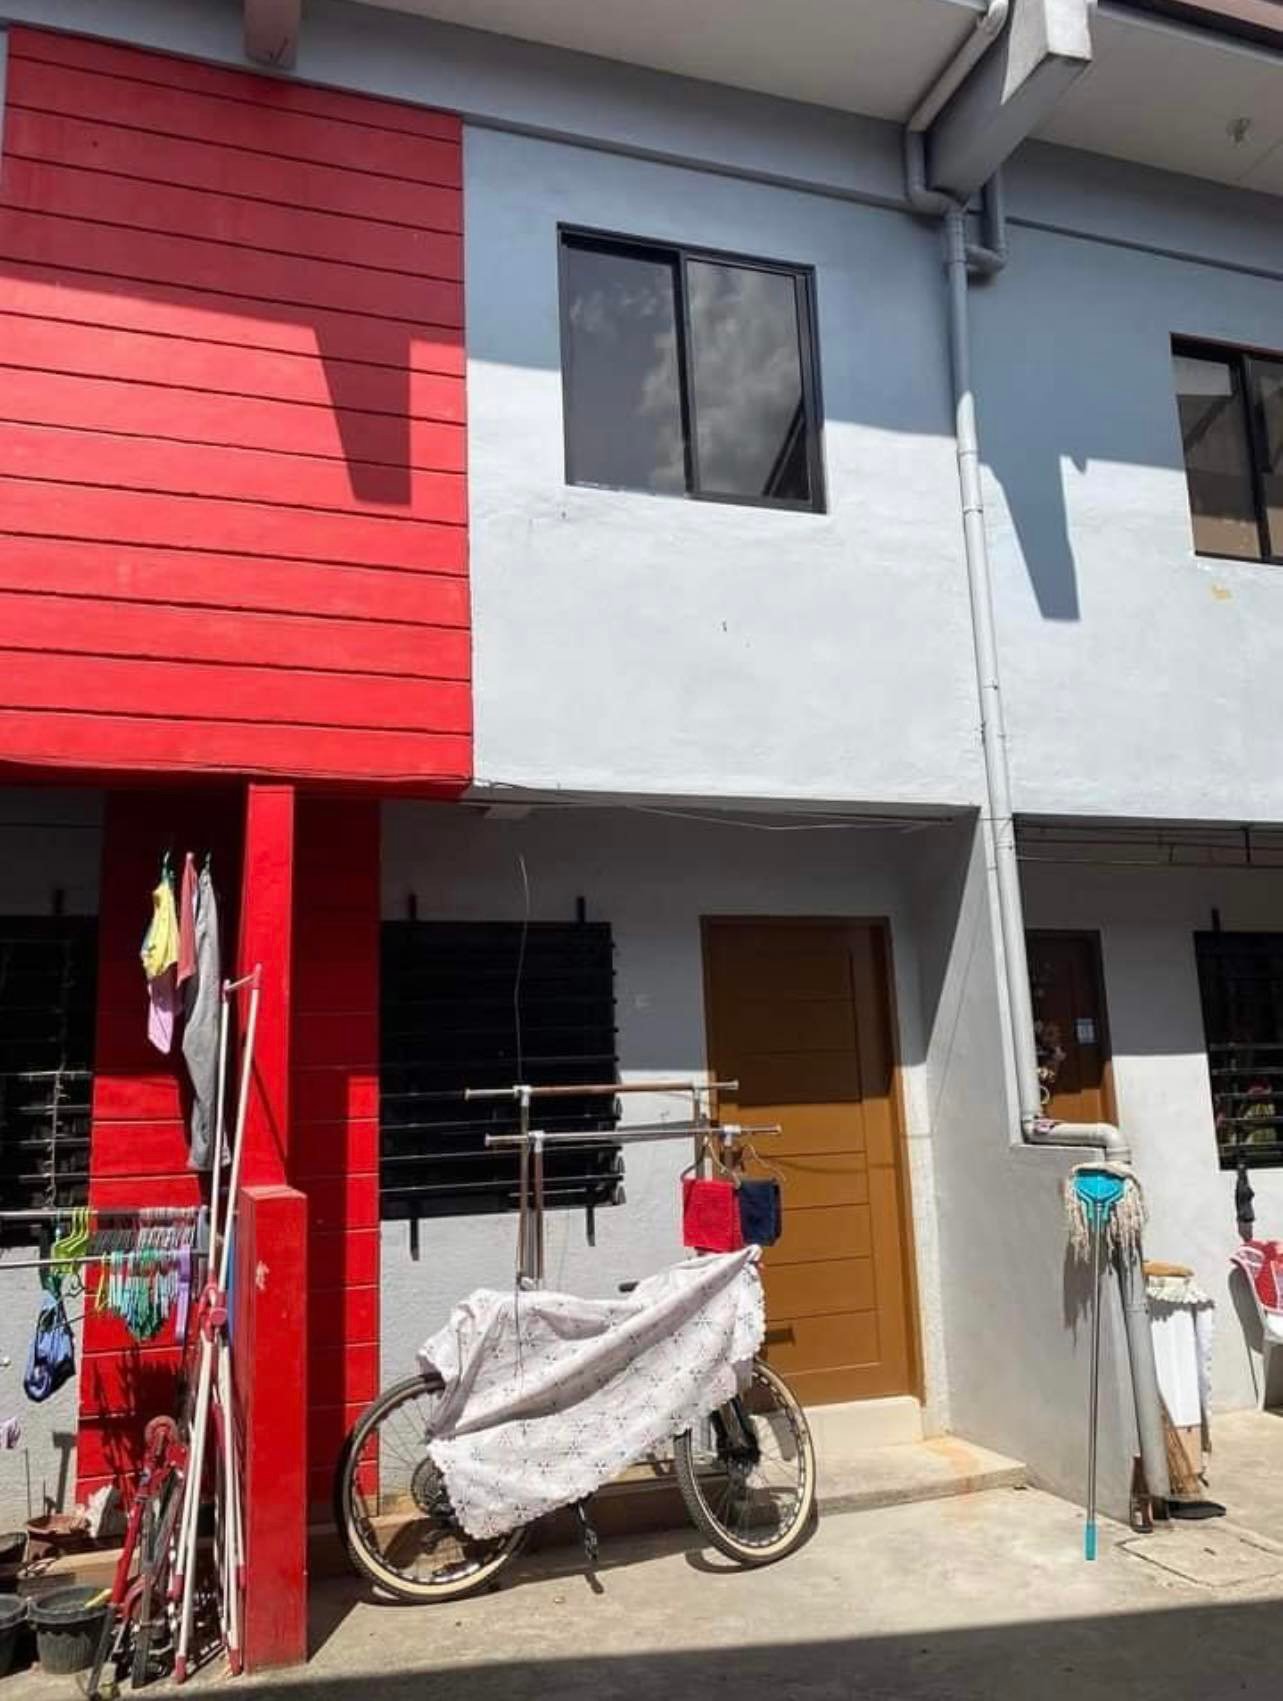 17 Units – Apartment Complex with INCOME for SALE in Nangka, MARIKINA